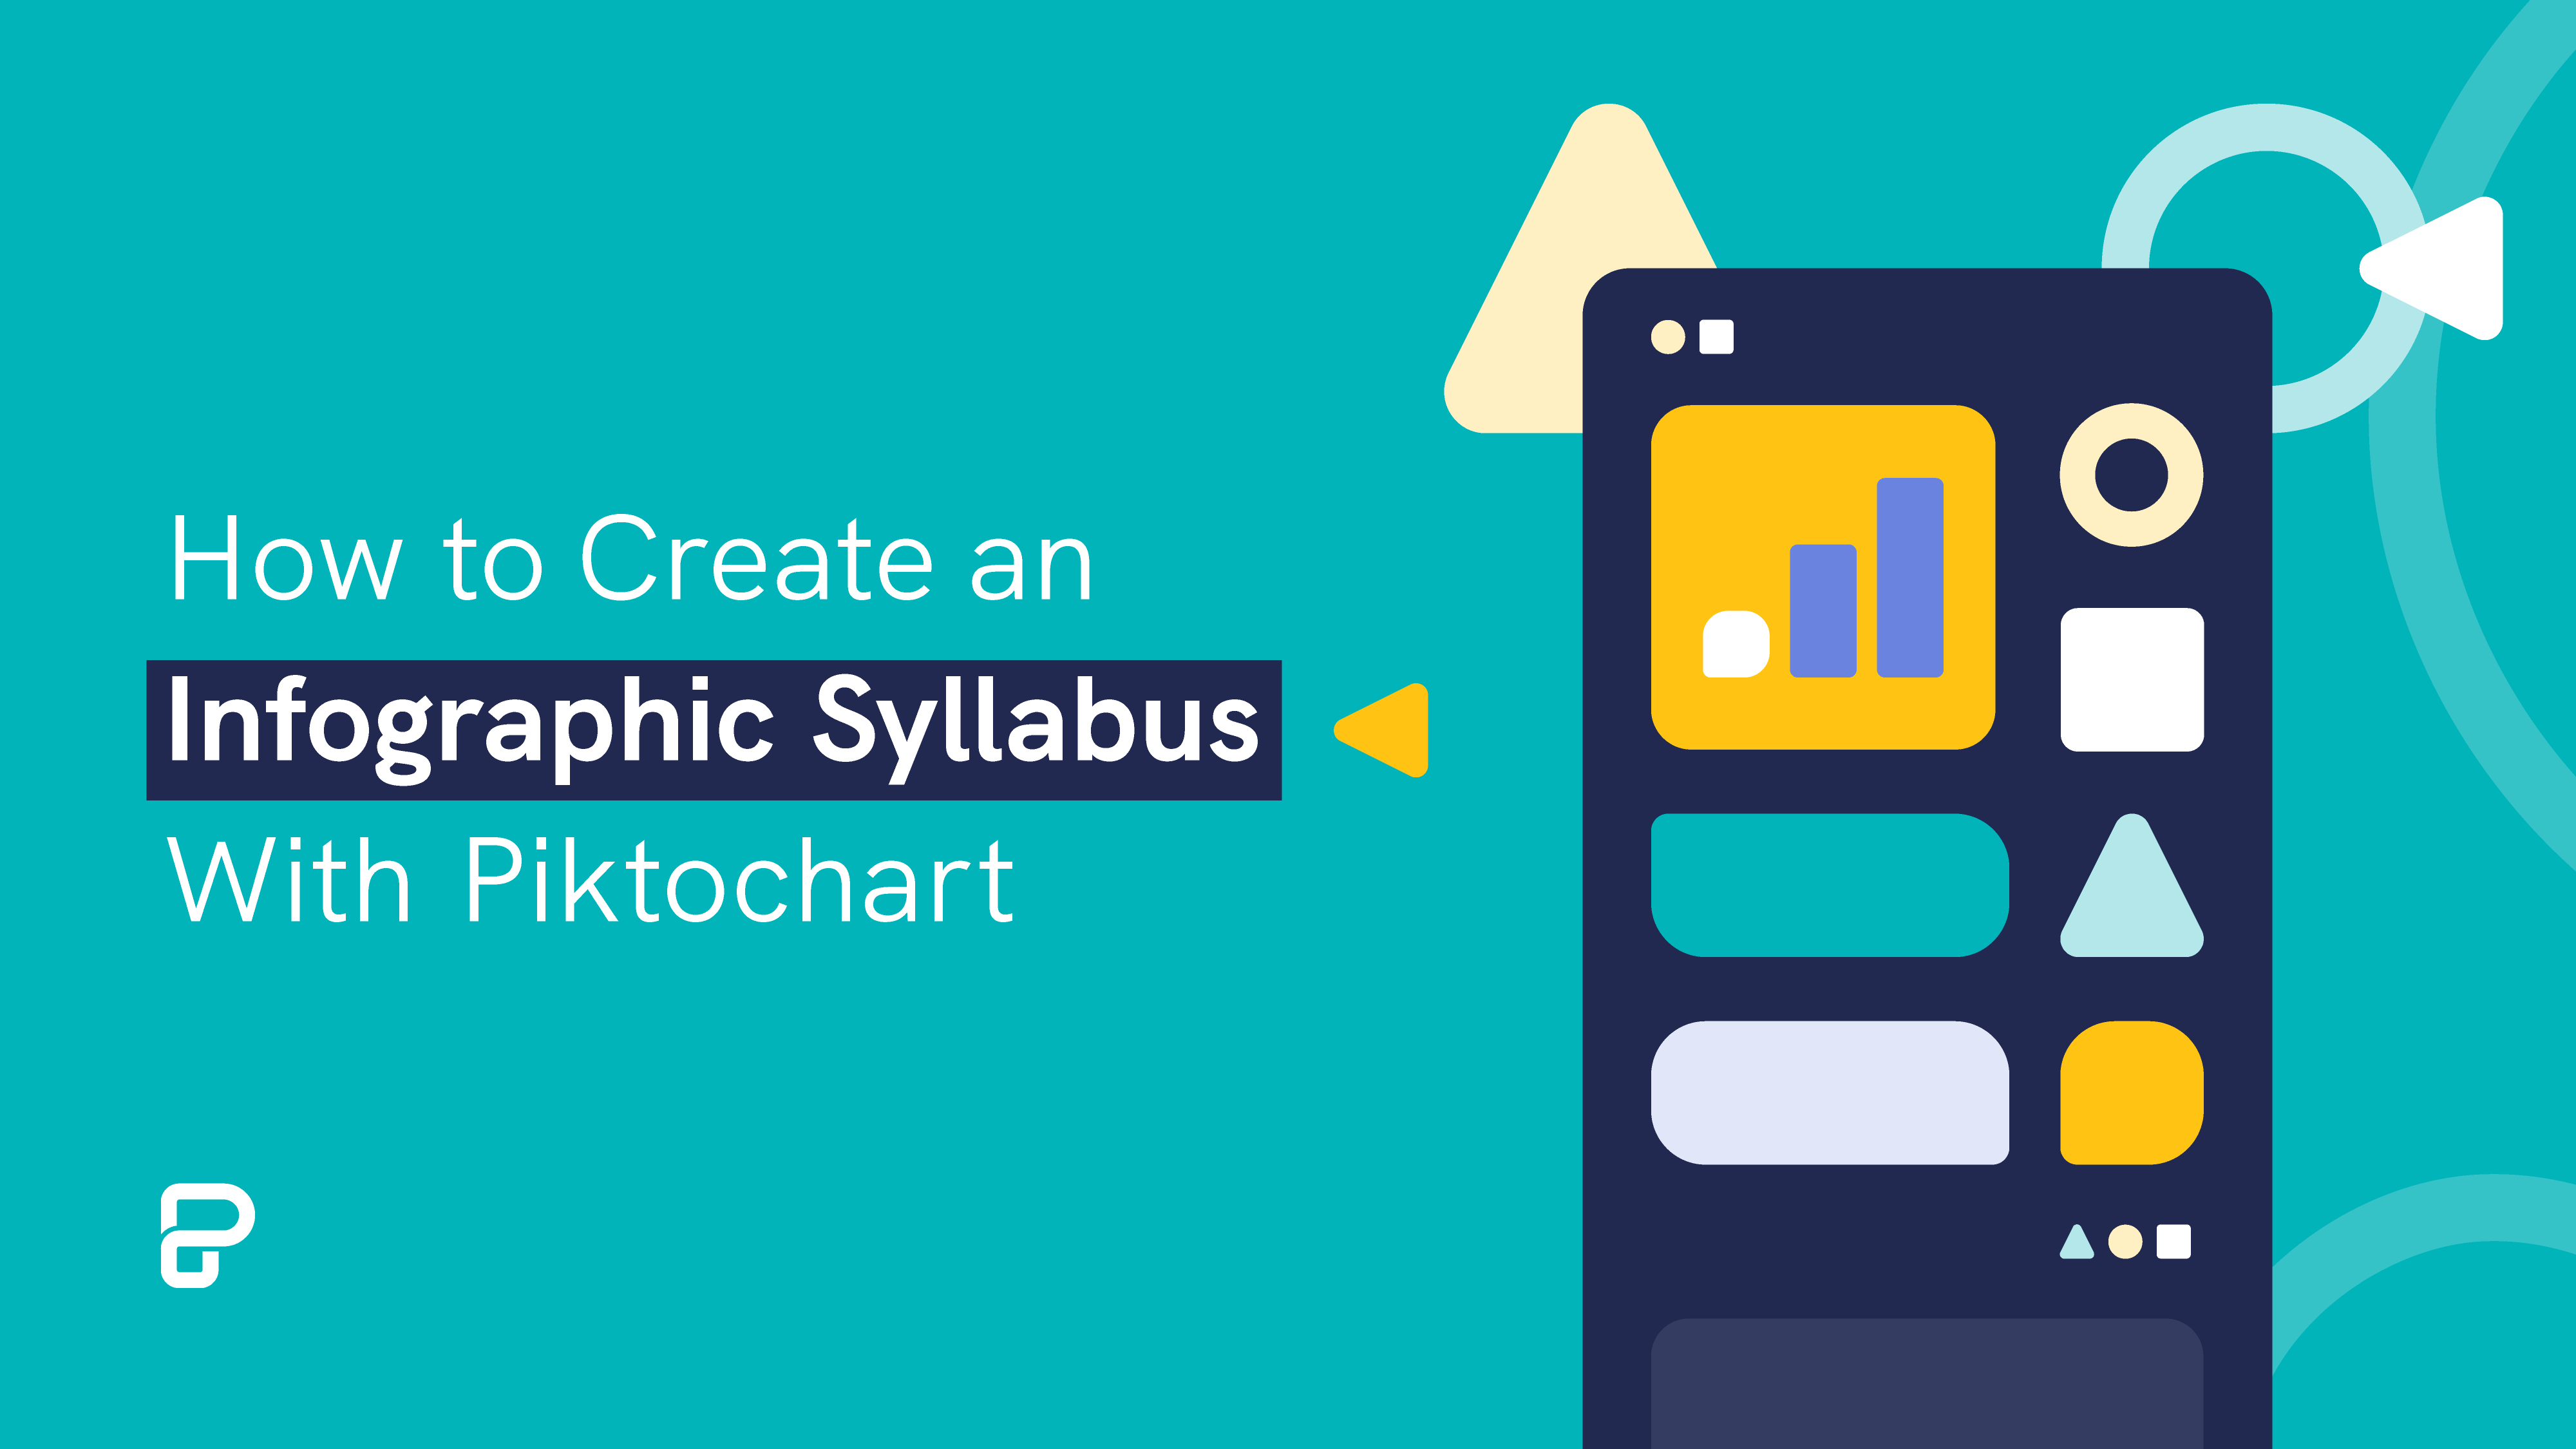 how to create an infographic syllabus with piktochart